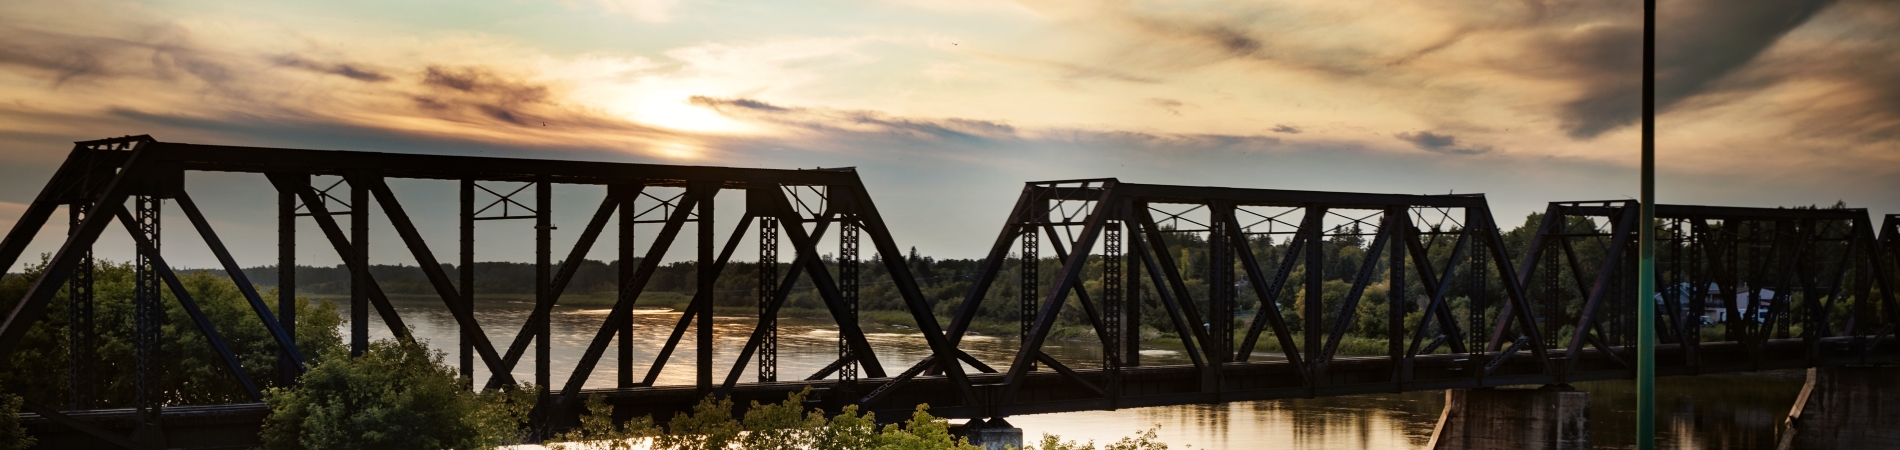 Train bridge over the river at sunset